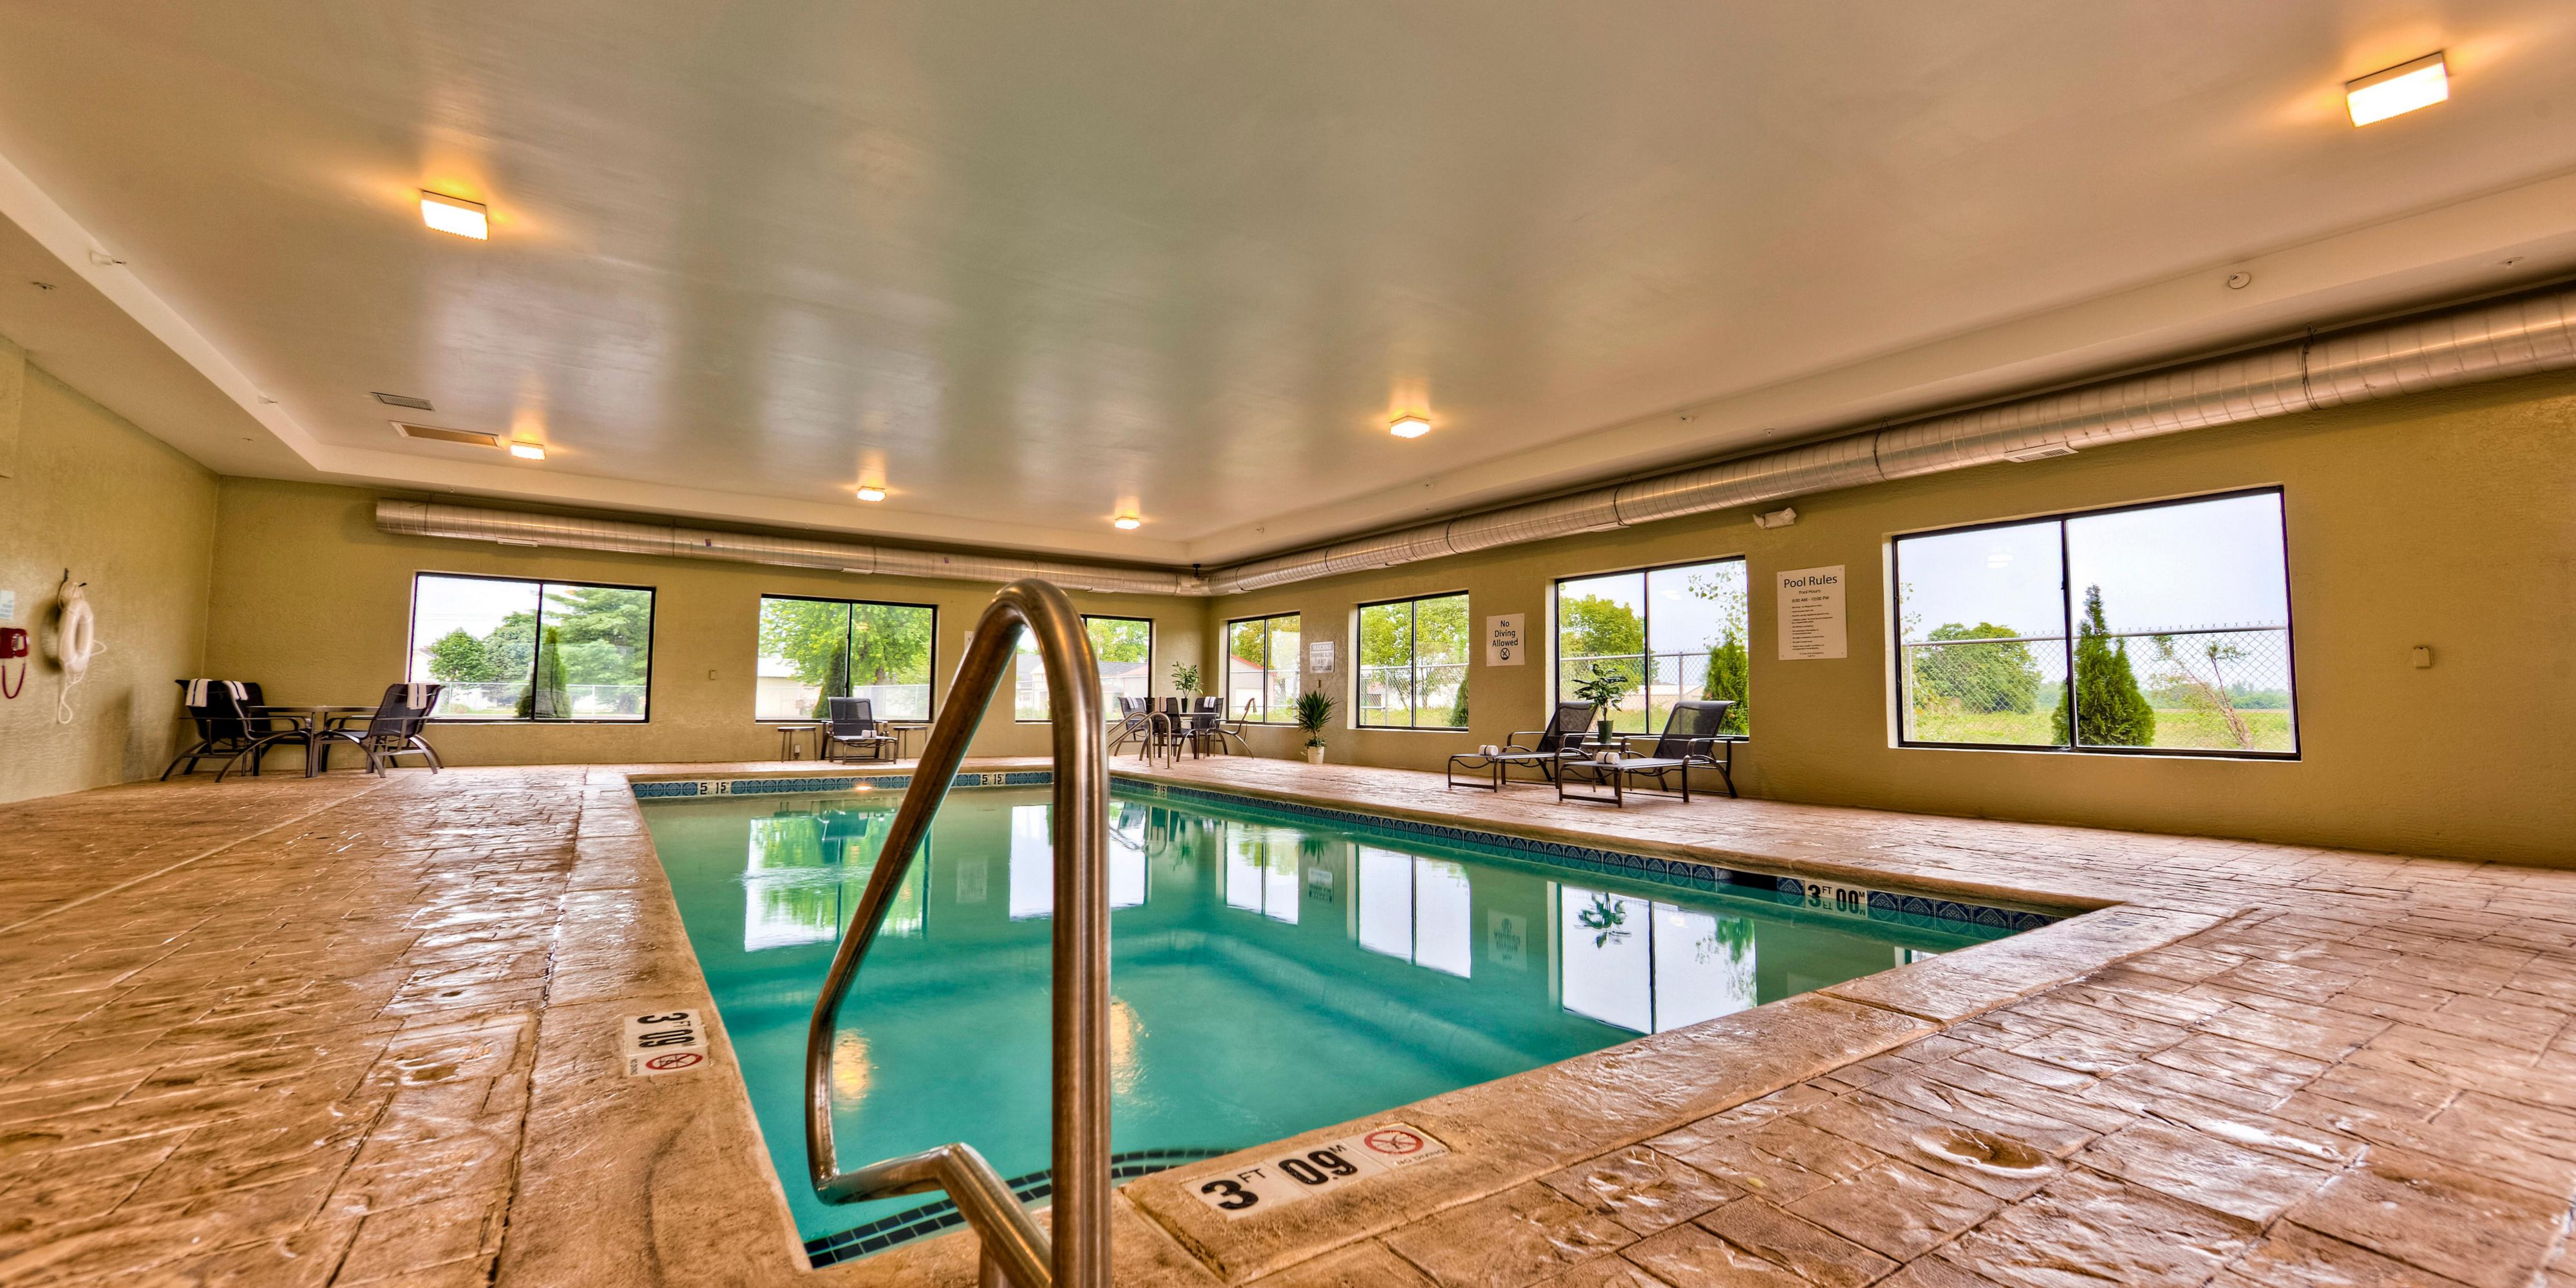 Enjoy our heated indoor pool, available 24 hours a day for guest use. 